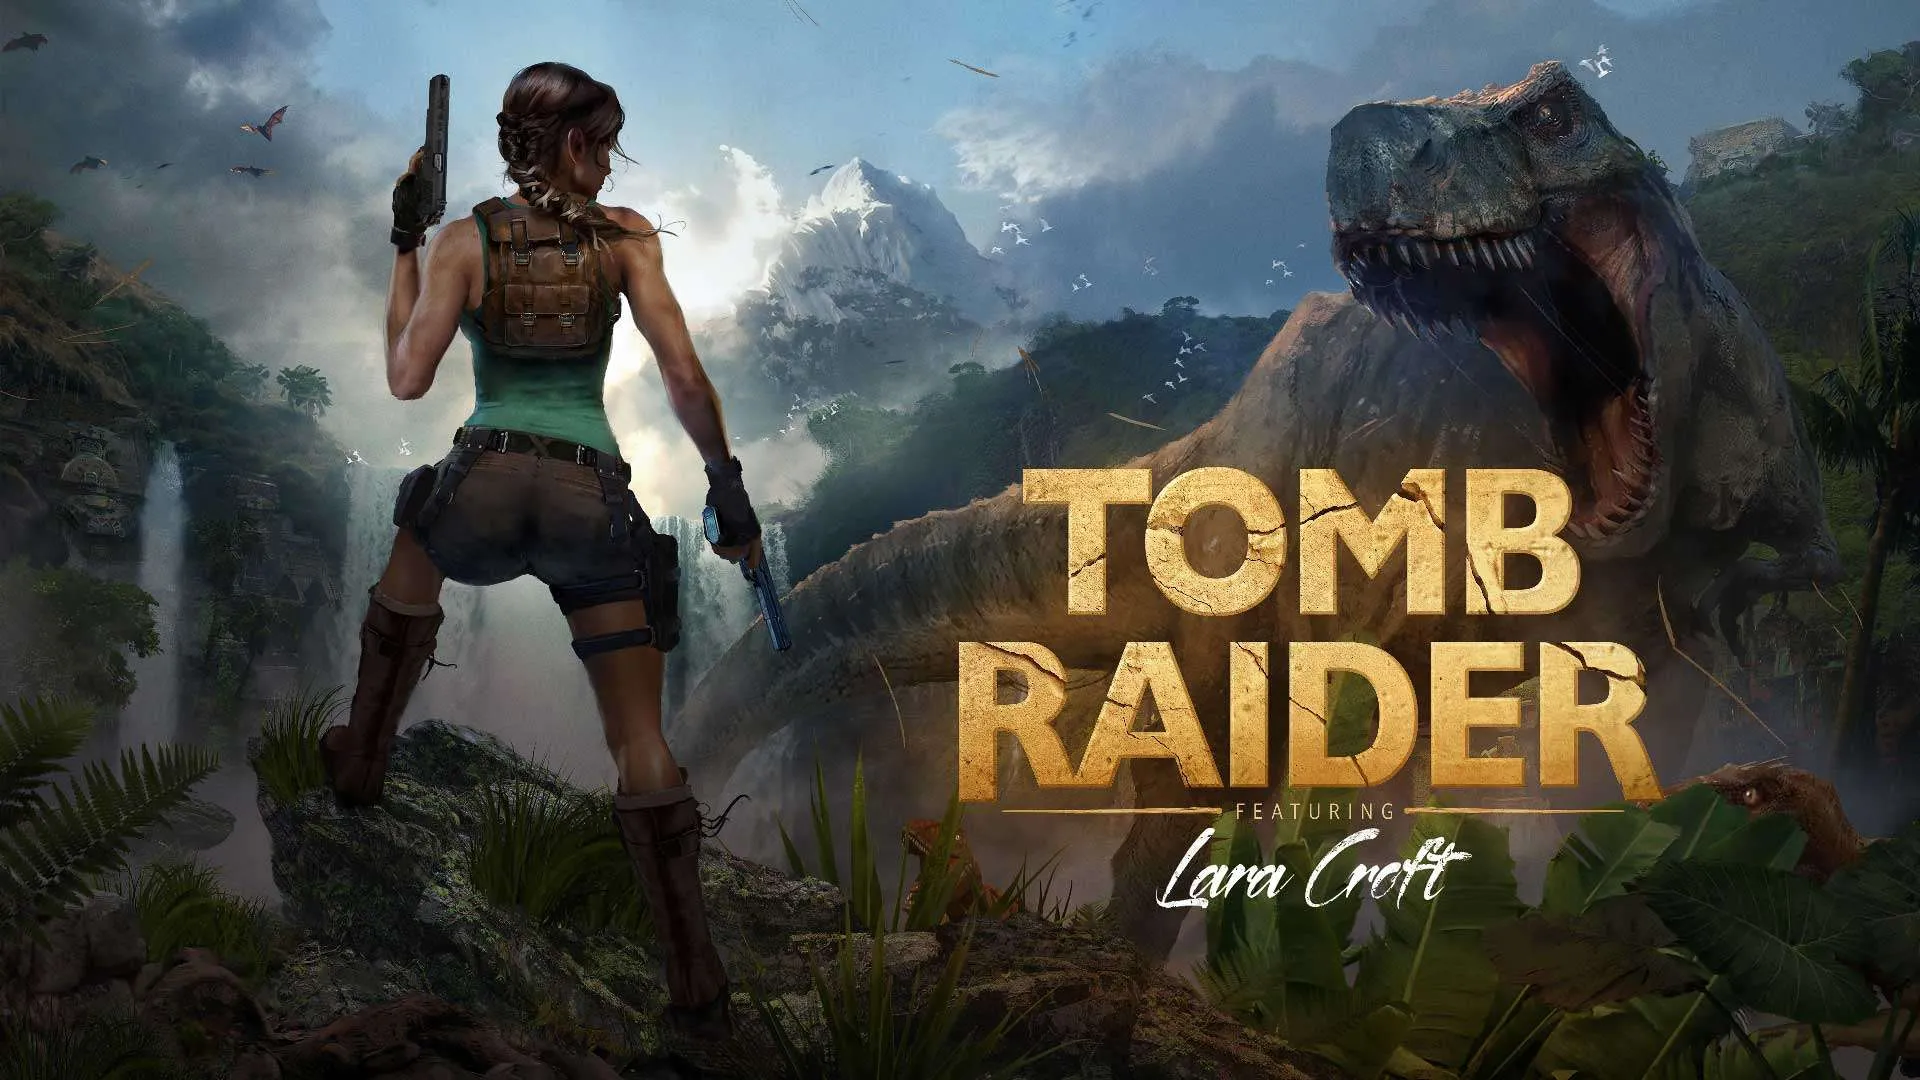 A new charity collaboration celebrates 25 years of Tomb Raider and Lara Croft